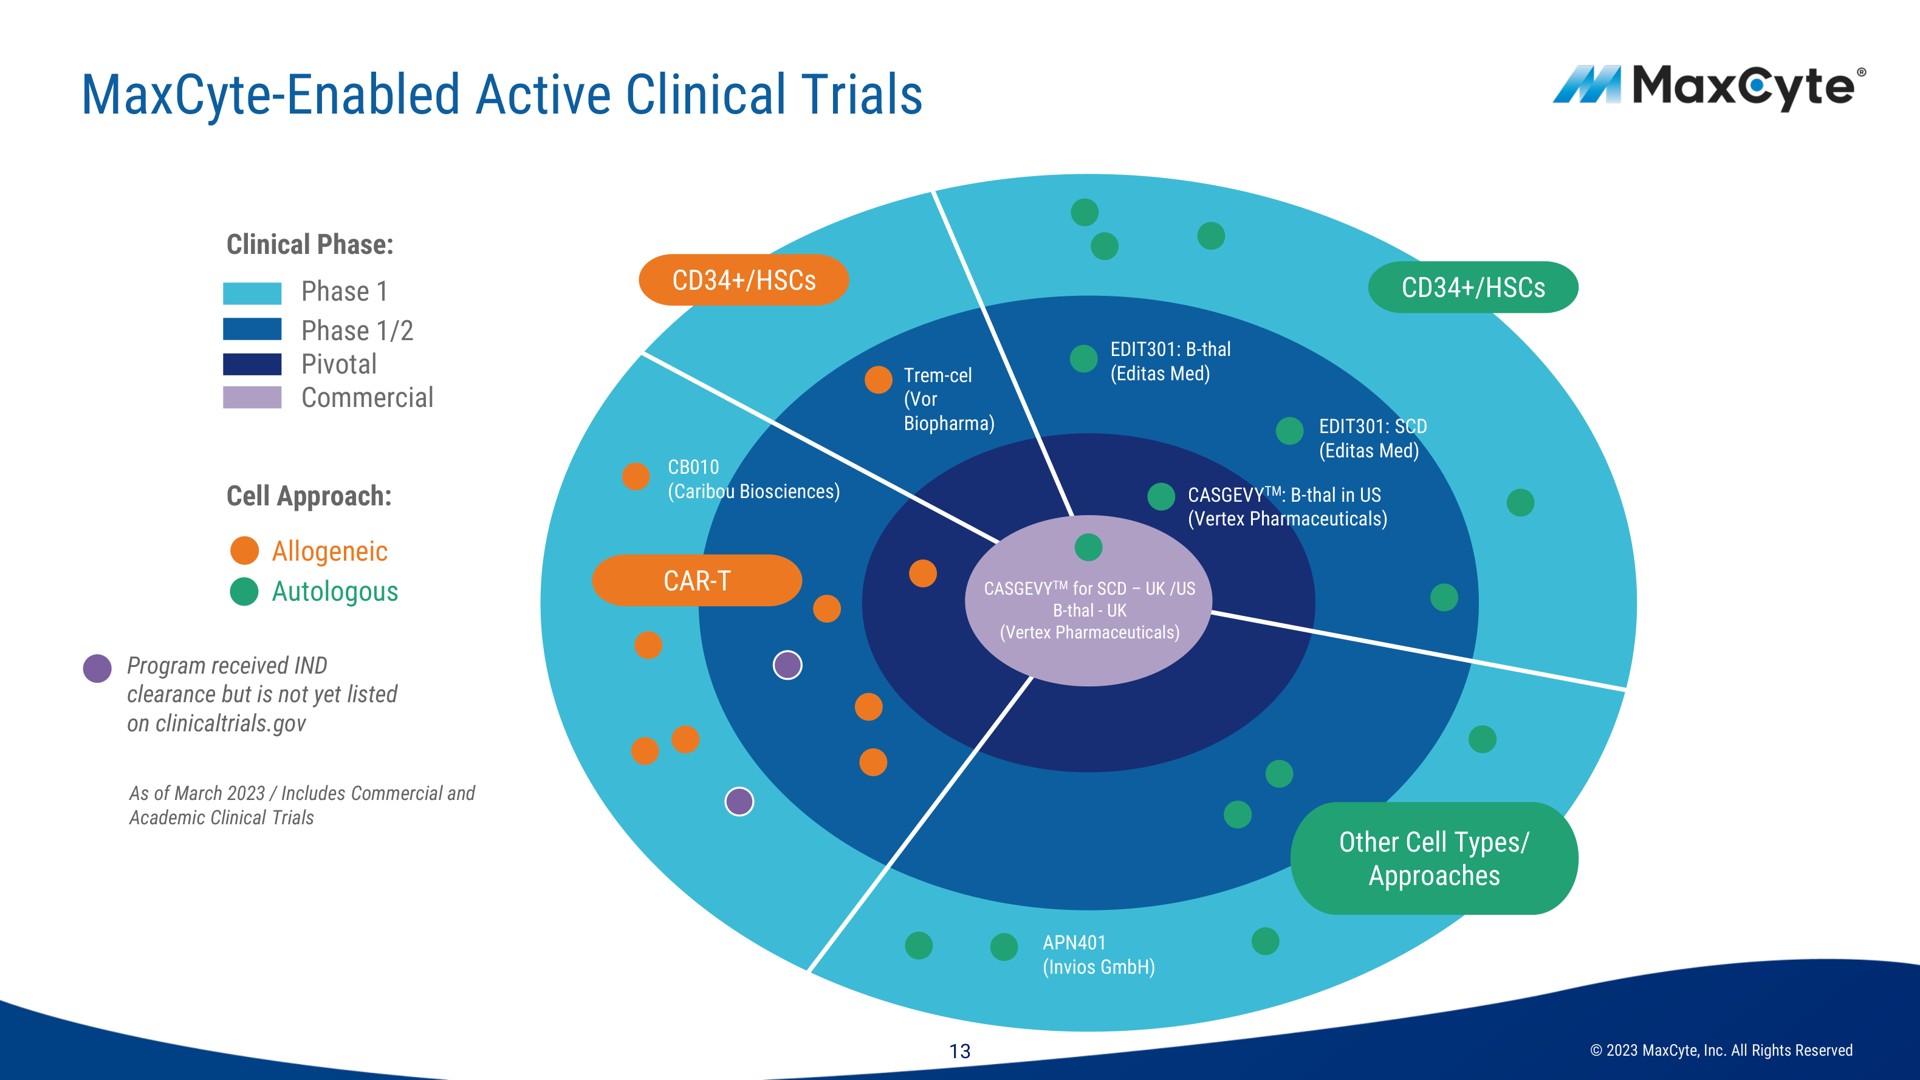 enabled active clinical trials | MaxCyte